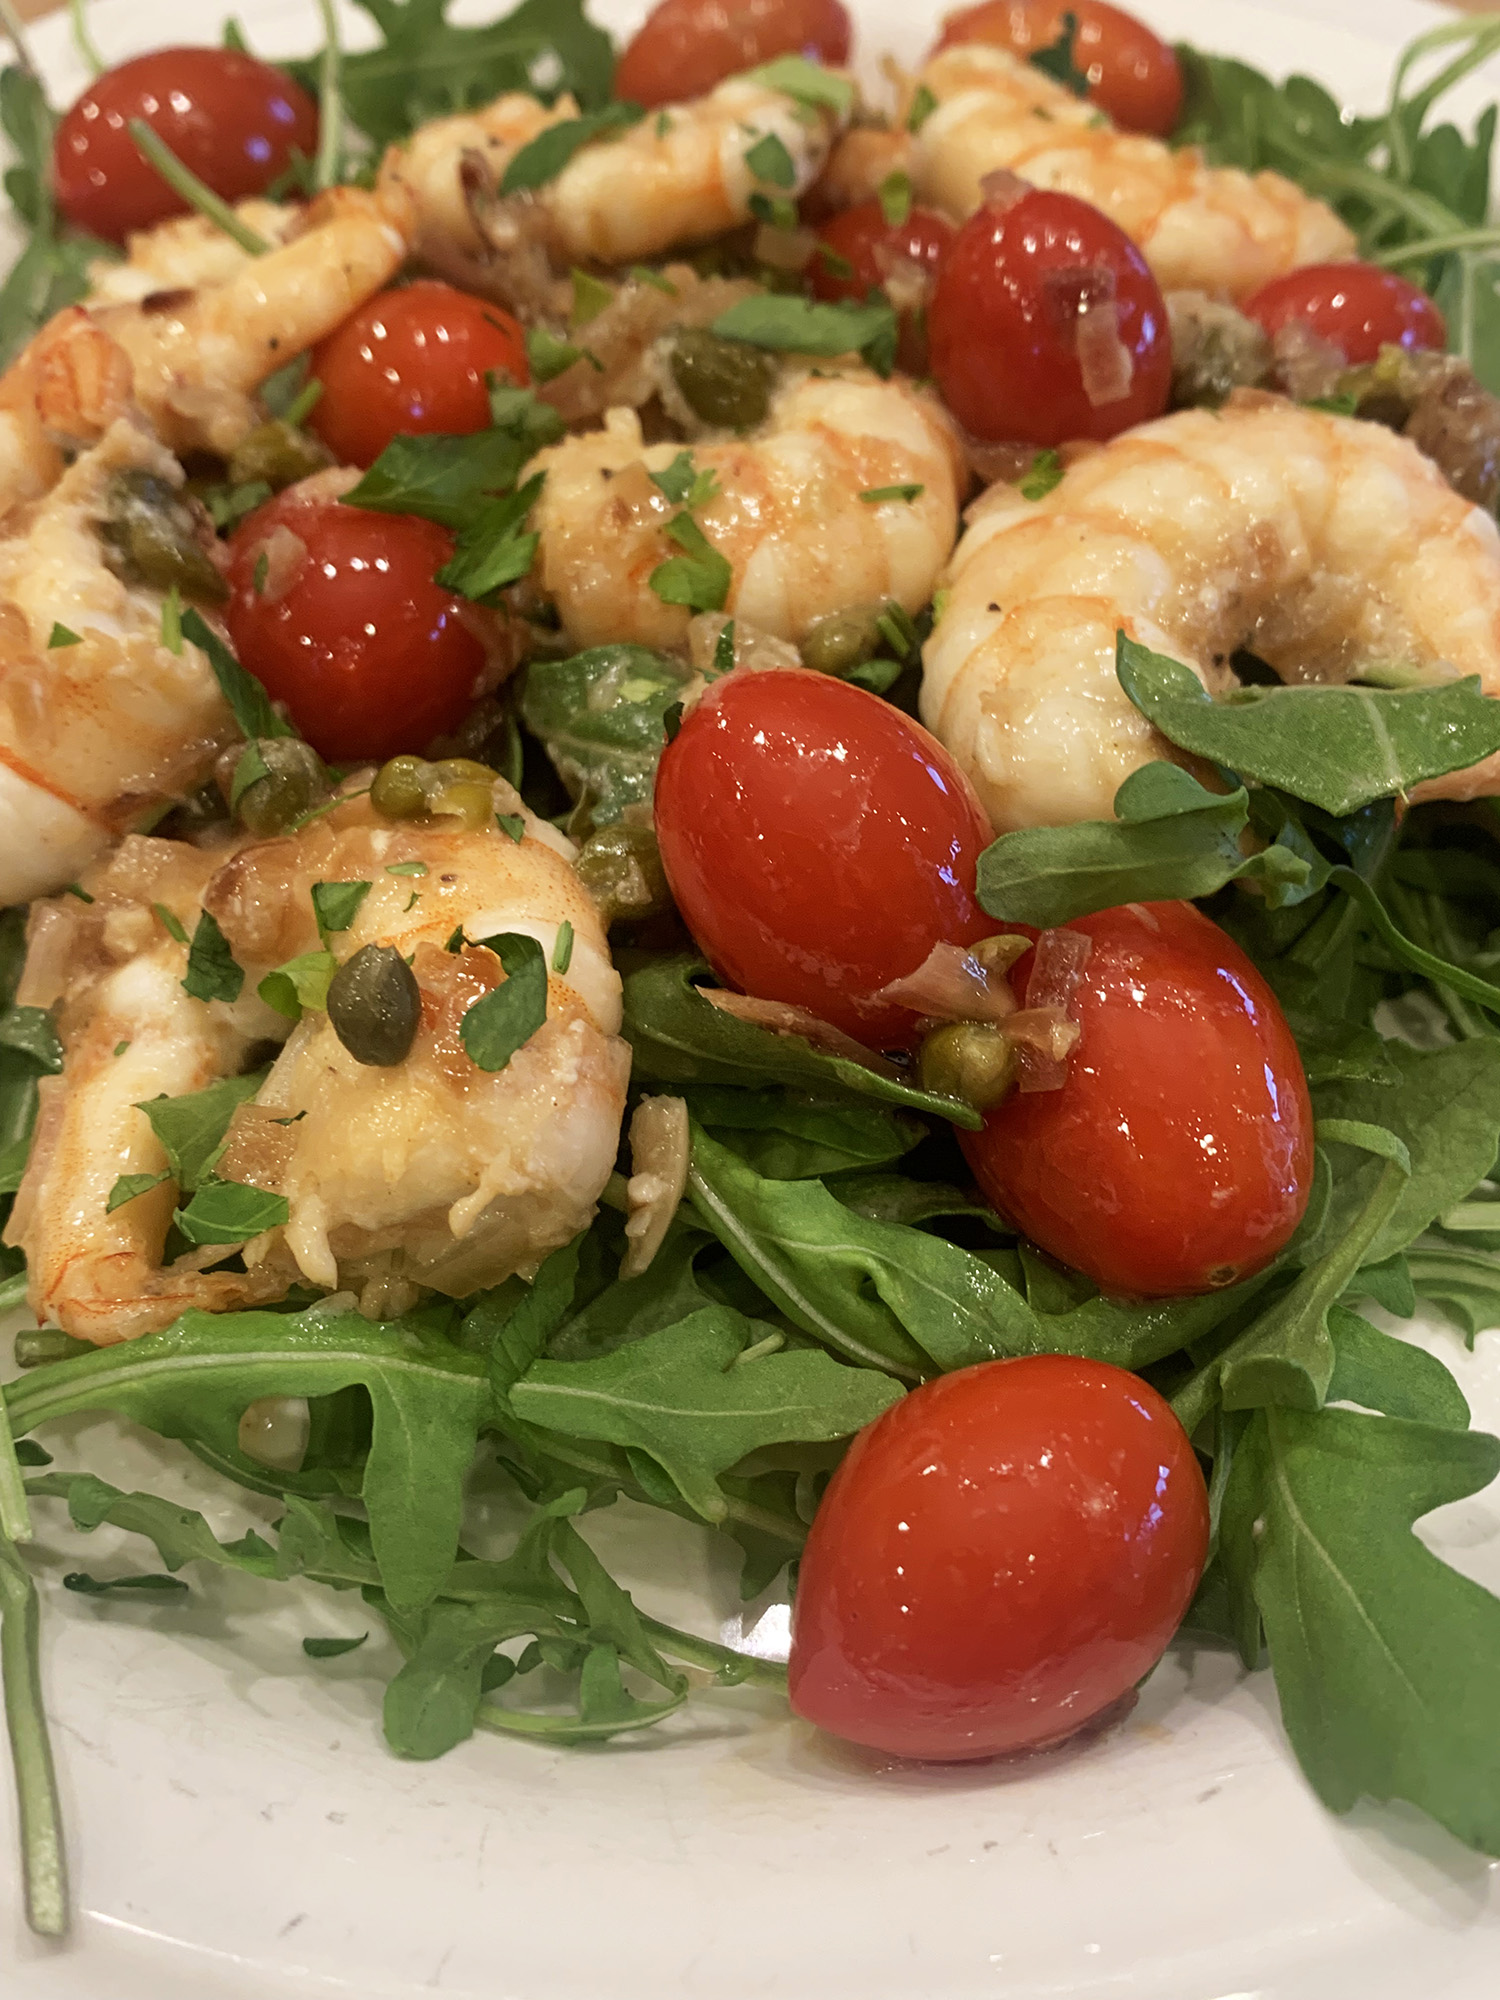 Lemon and Capers and Shrimp, Oh My!